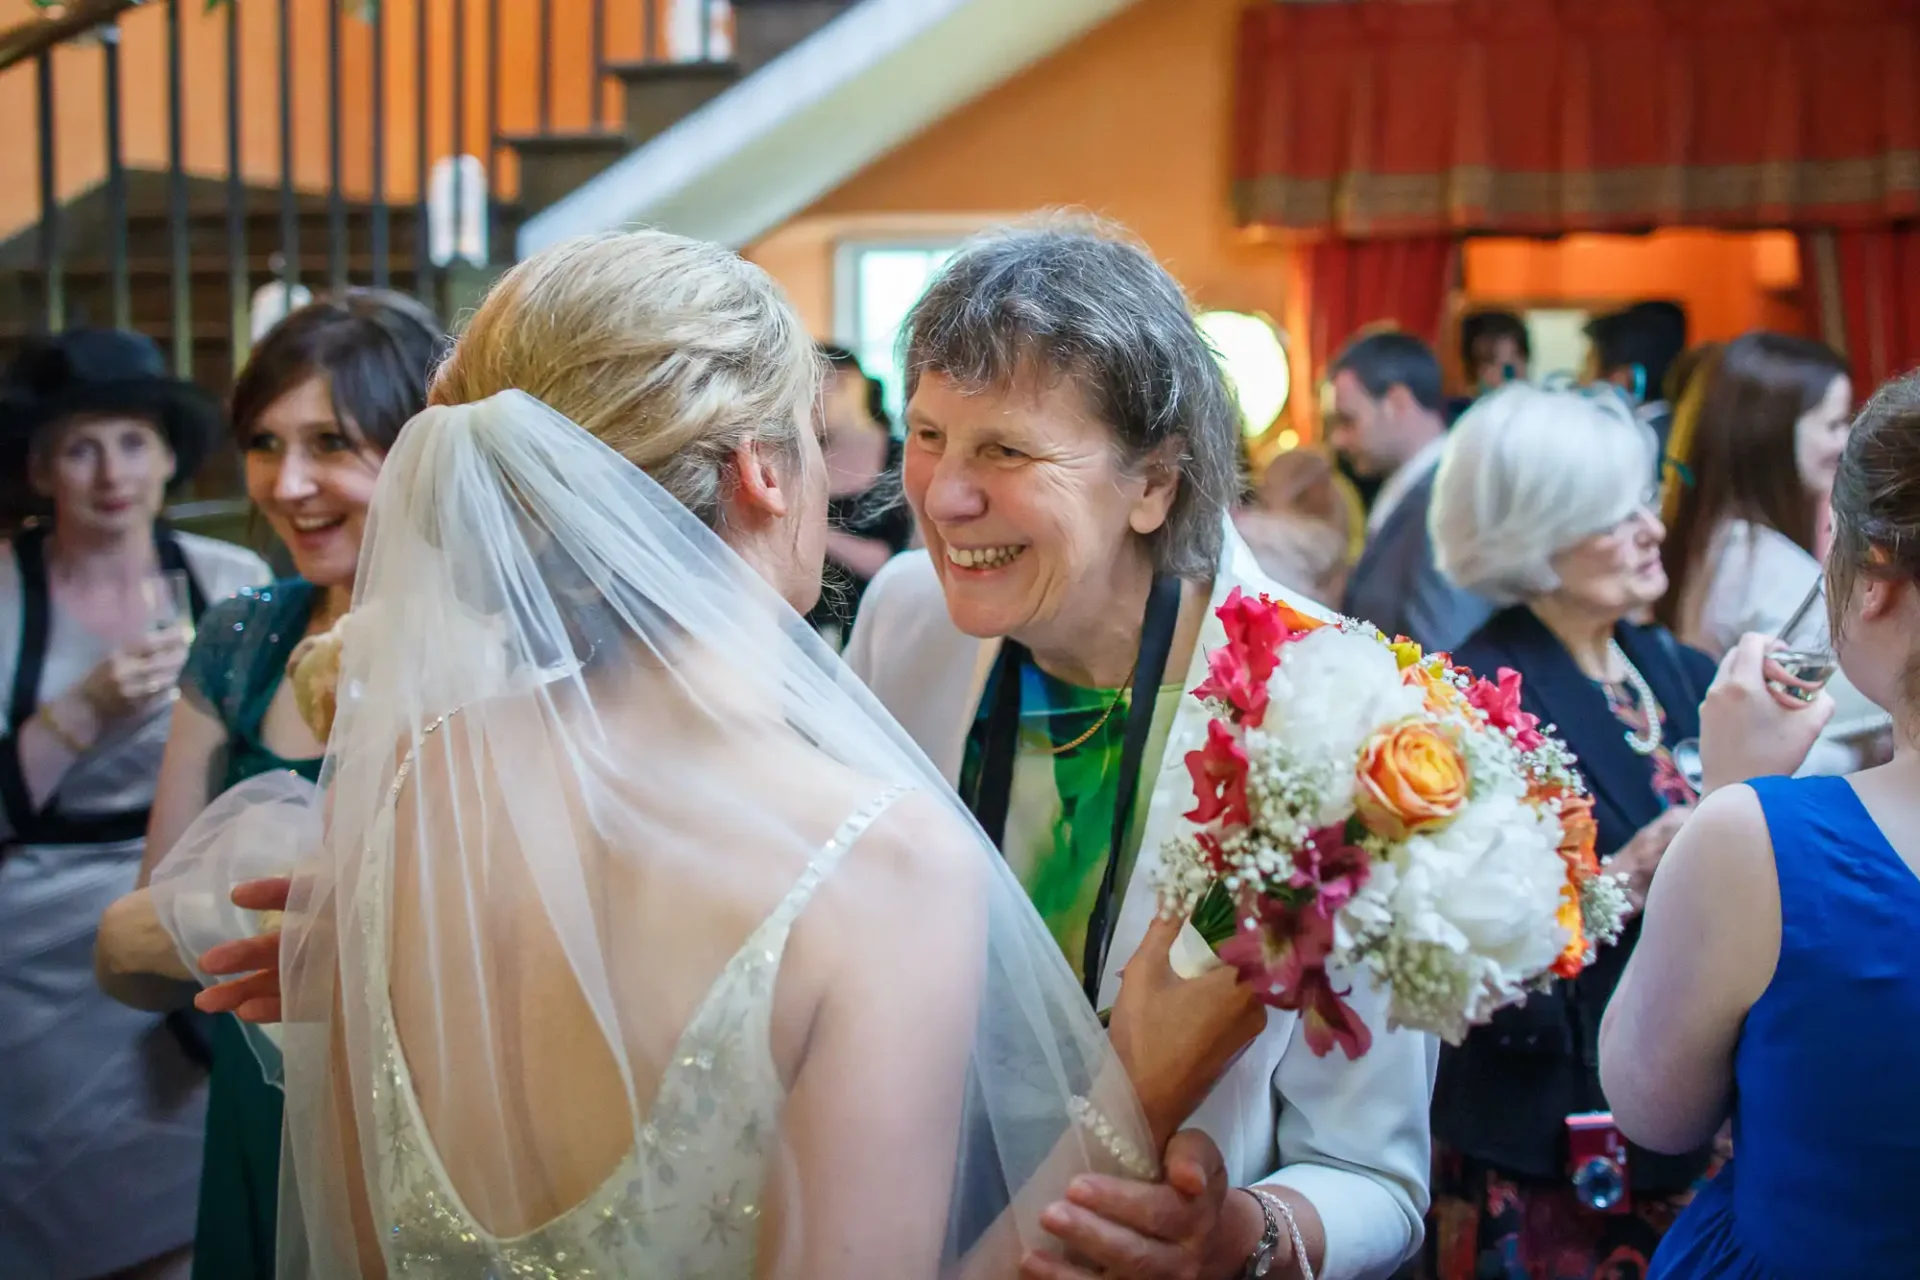 A bride conversing with an older woman holding flowers at a wedding, surrounded by guests.